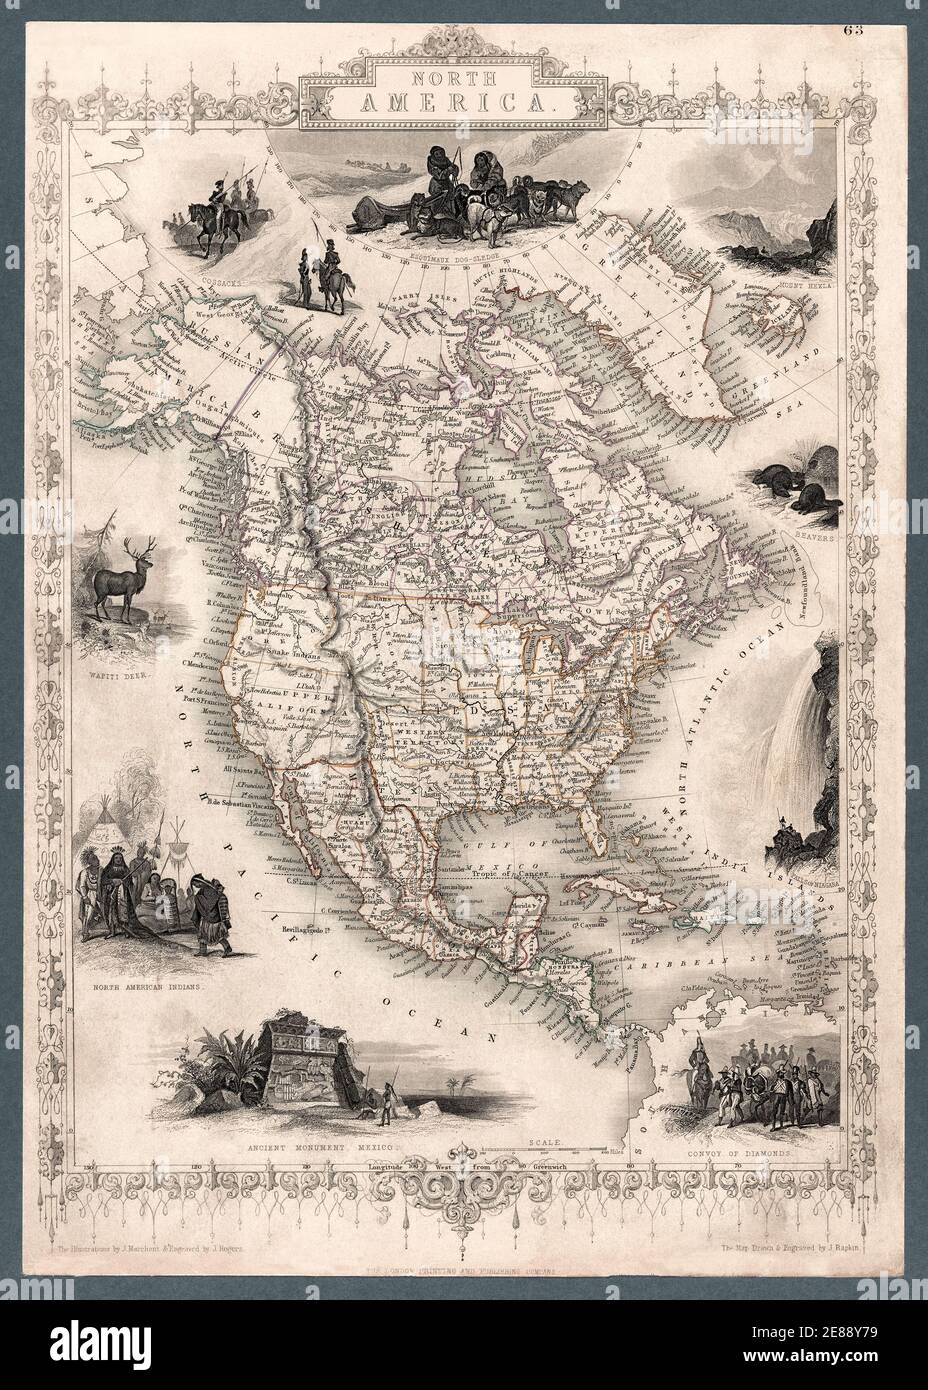 North America Map 1851 with illustrations and boundaries. Atlas map of North America including the United States, Mexico, Central America, Caribbean islands, including detailed boundaries, place names, and illustrations. The map appears remarkably accurate for the date when it was first made, 1851. This is an enhanced, restored reproduction of an antique map. Stock Photo